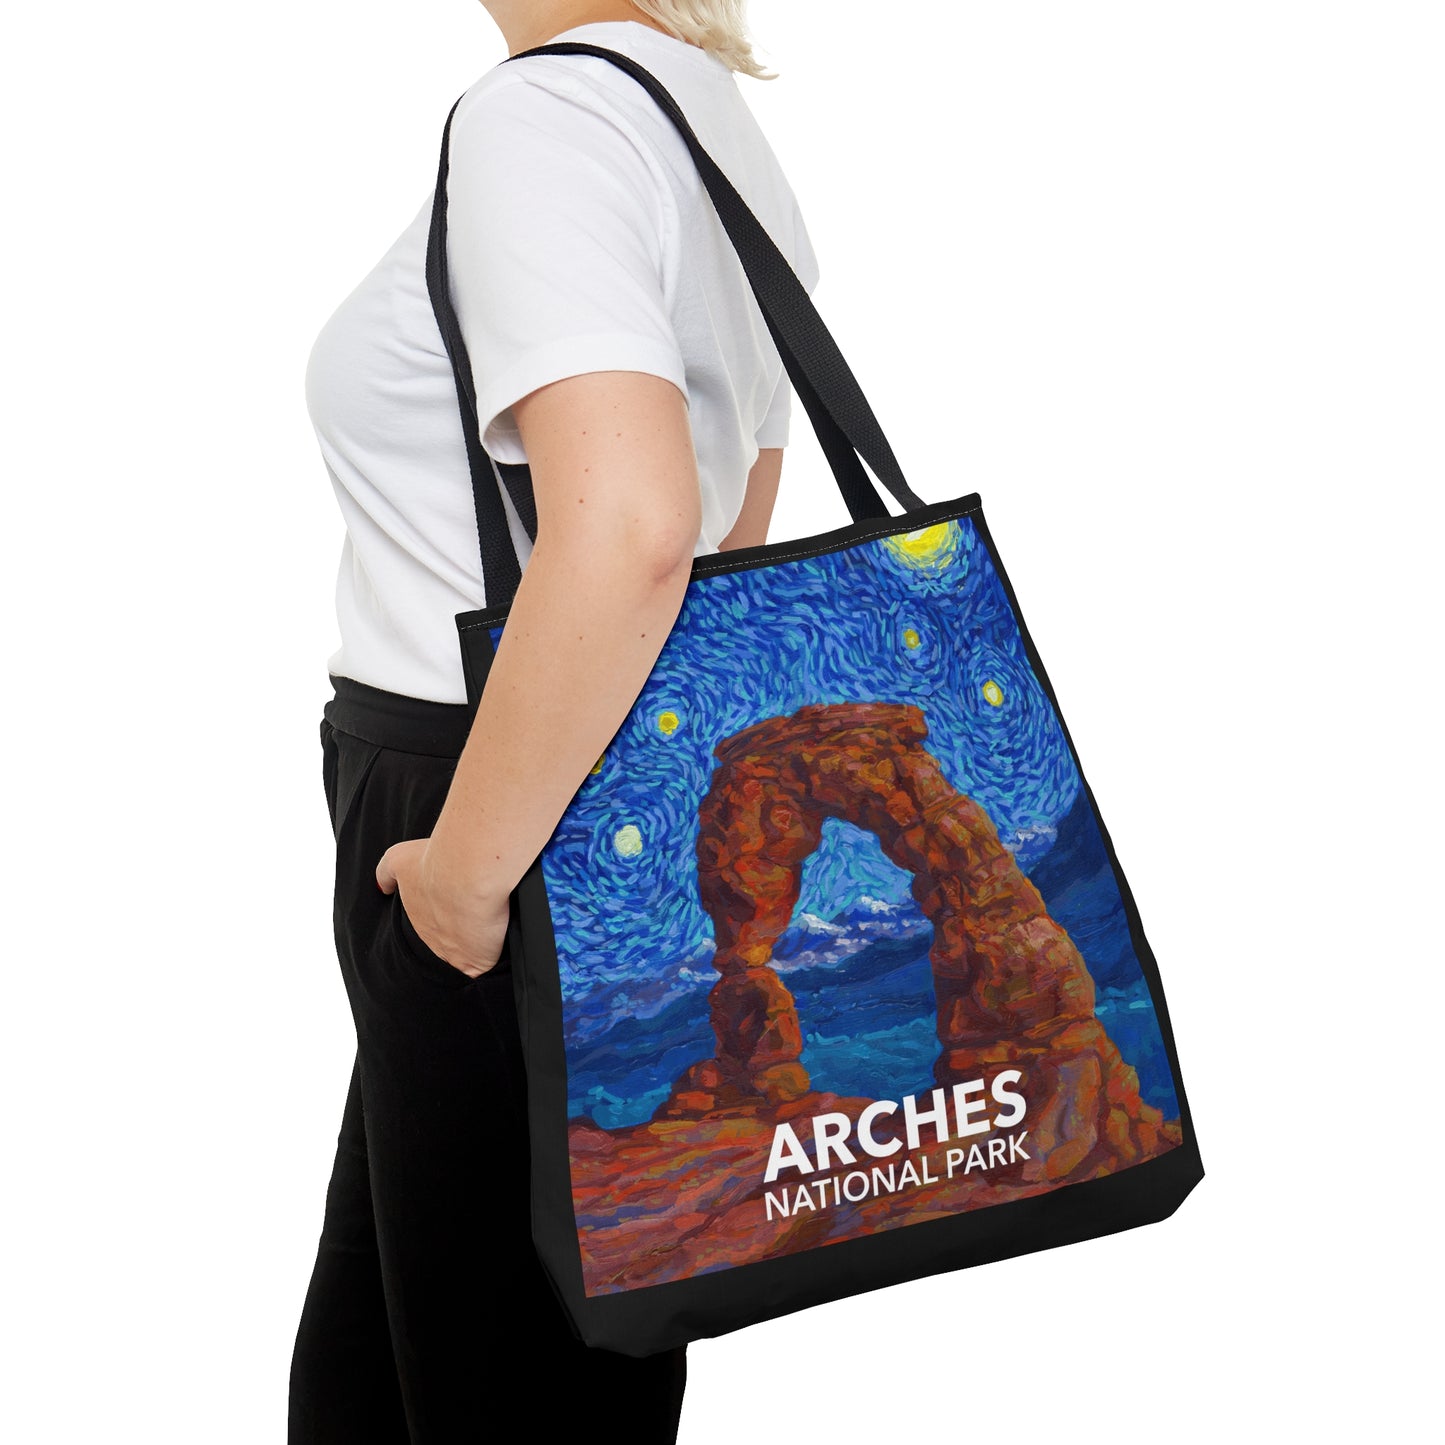 Arches National Park Tote Bag - The Starry Night